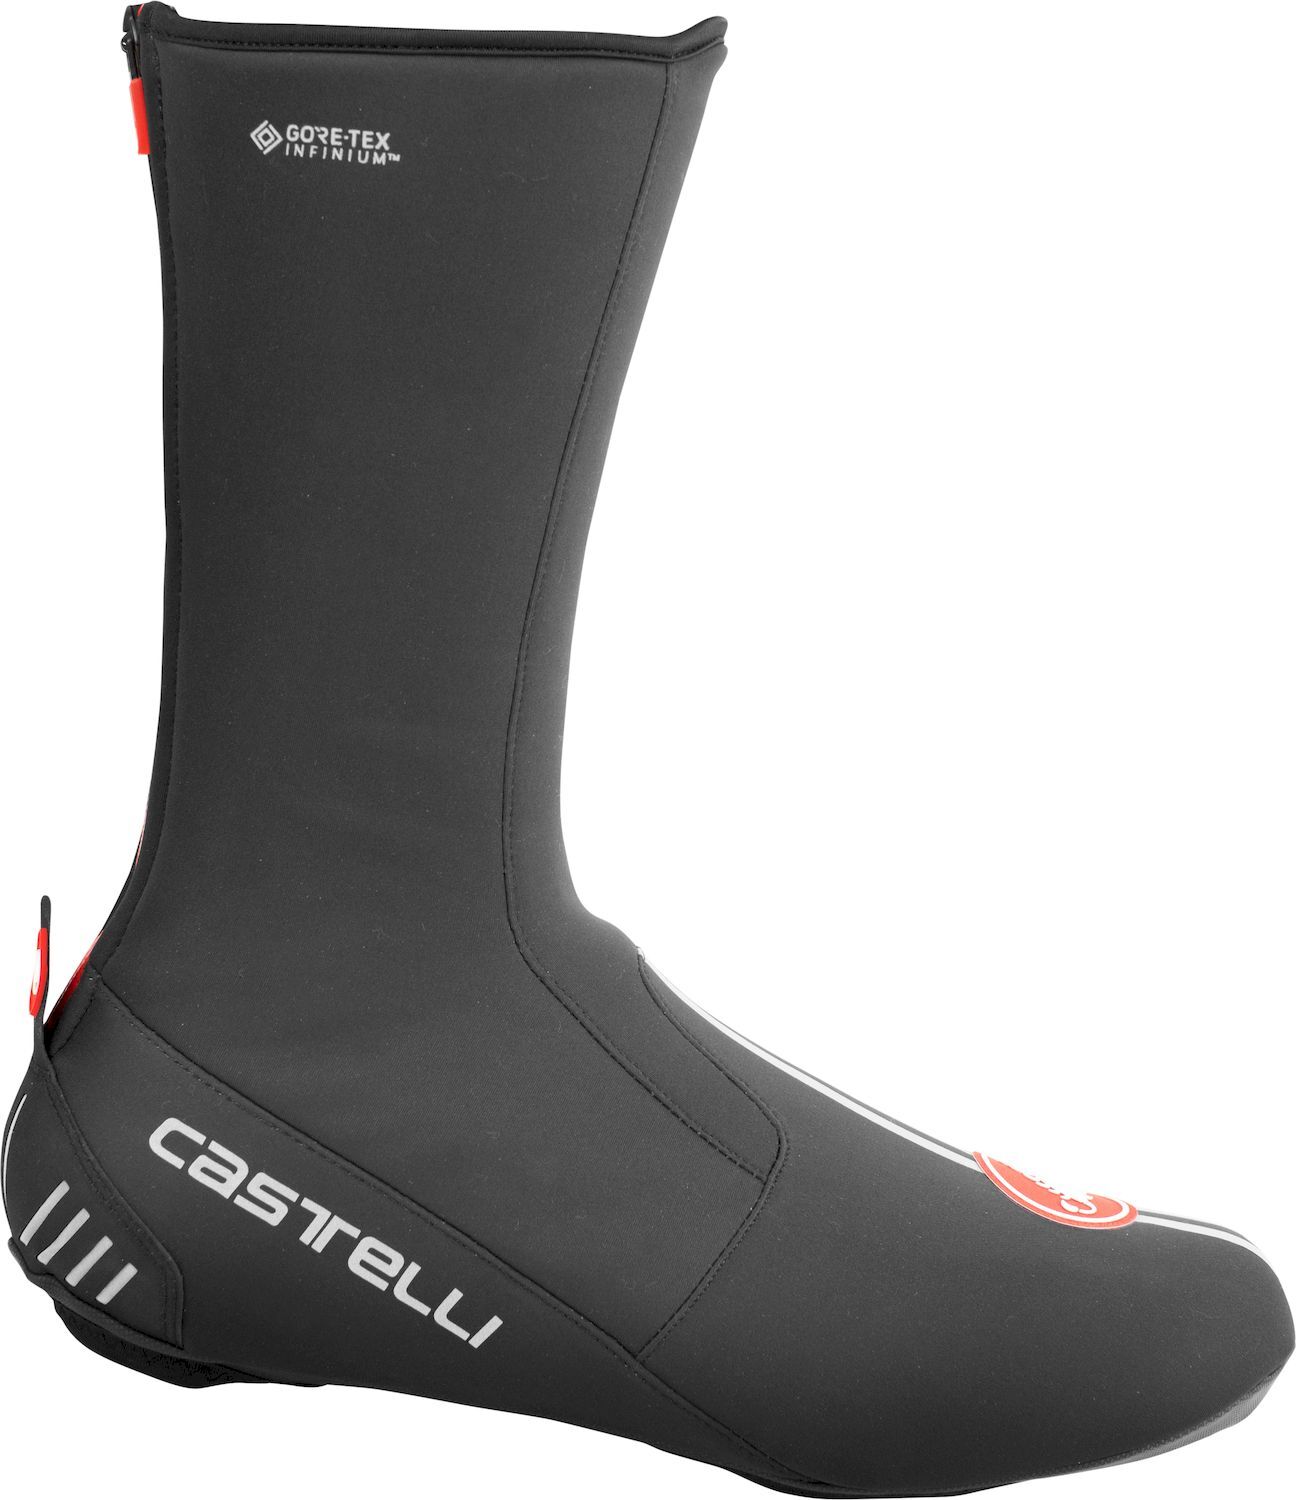 Castelli Estremo - Cycling overshoes